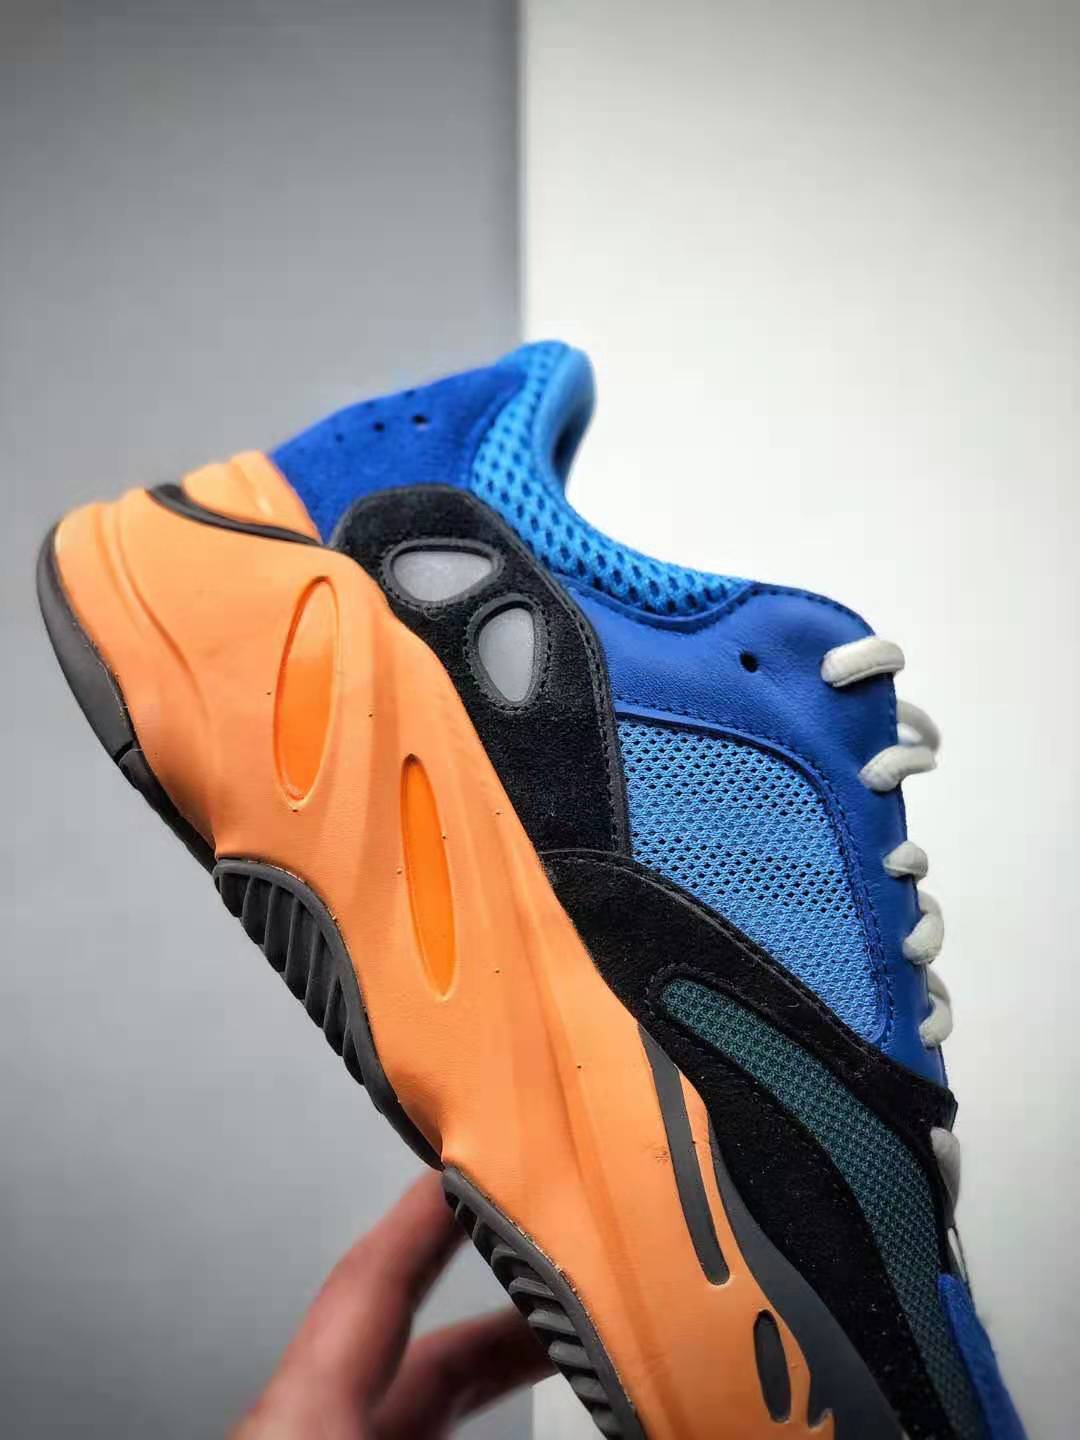 Adidas Yeezy Boost 700 Bright Blue GZ0541 - Premium Sneakers for Maximum Style